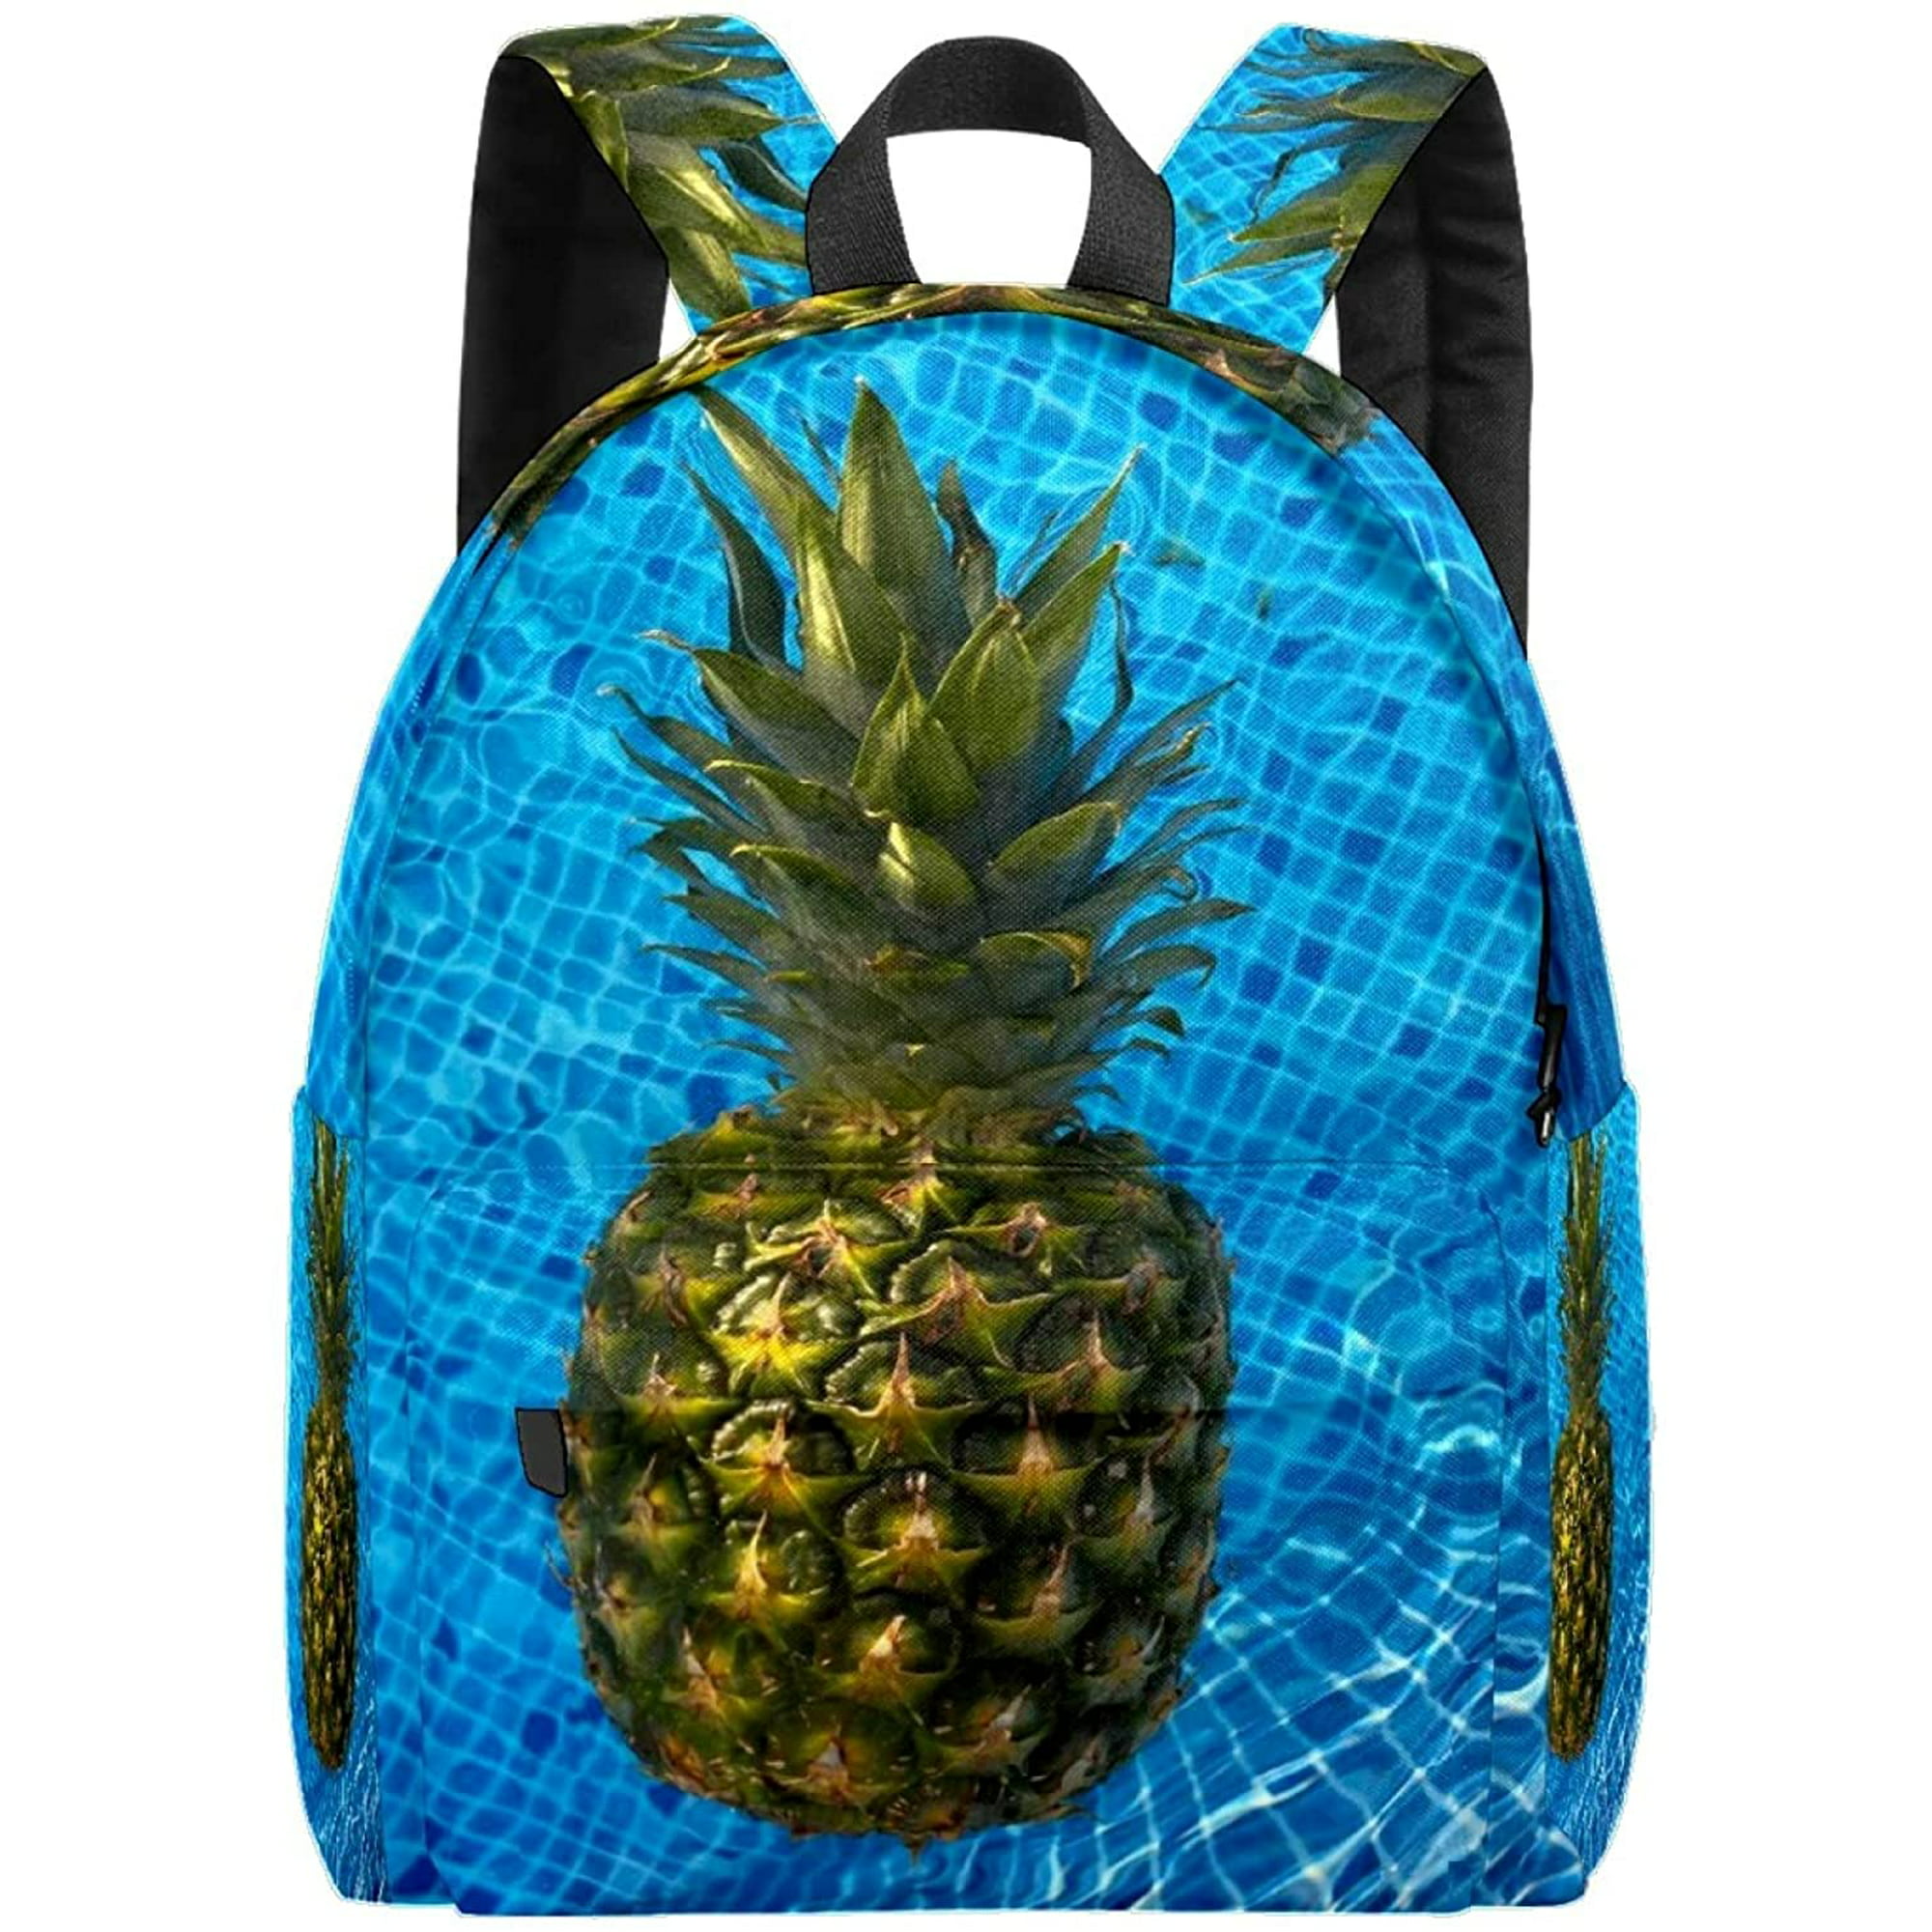 Pineapple School Bookbags Computer Daypack for Travel Hiking Camping Laptop Backpack Boys Grils 